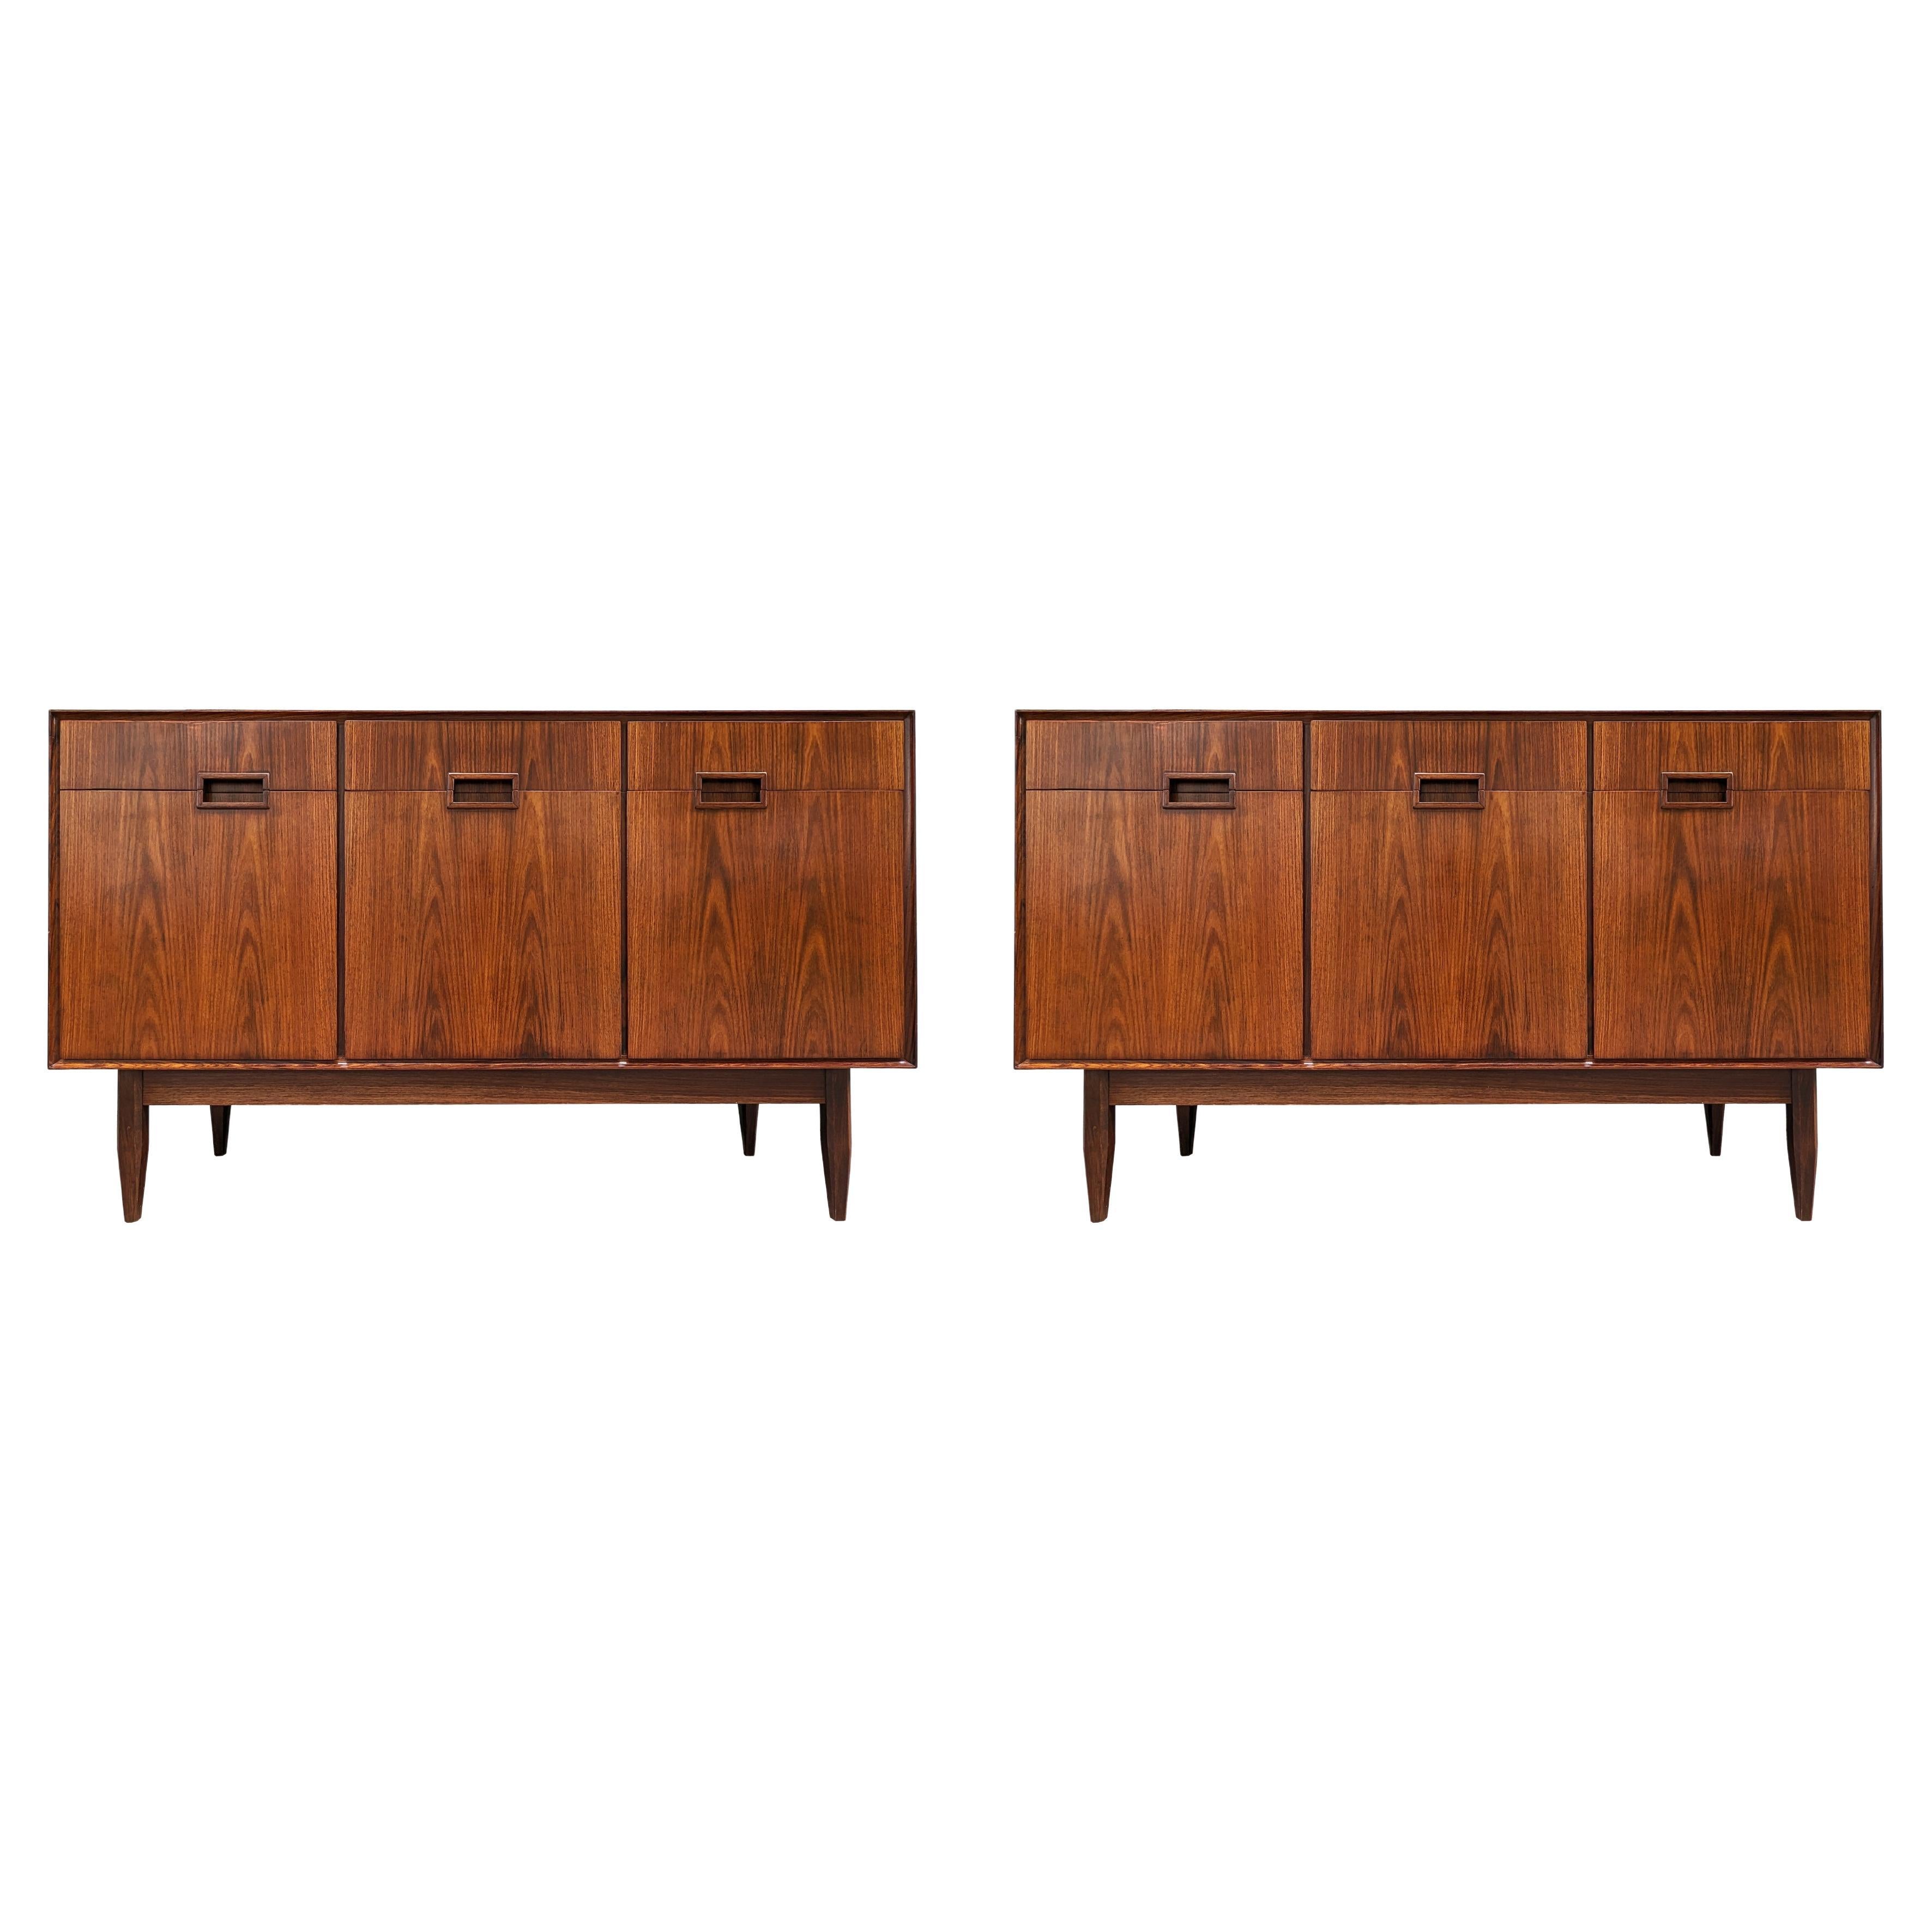 Italian Wooden Mid Century Modern Sideboards in the style of Dassi, set of 2